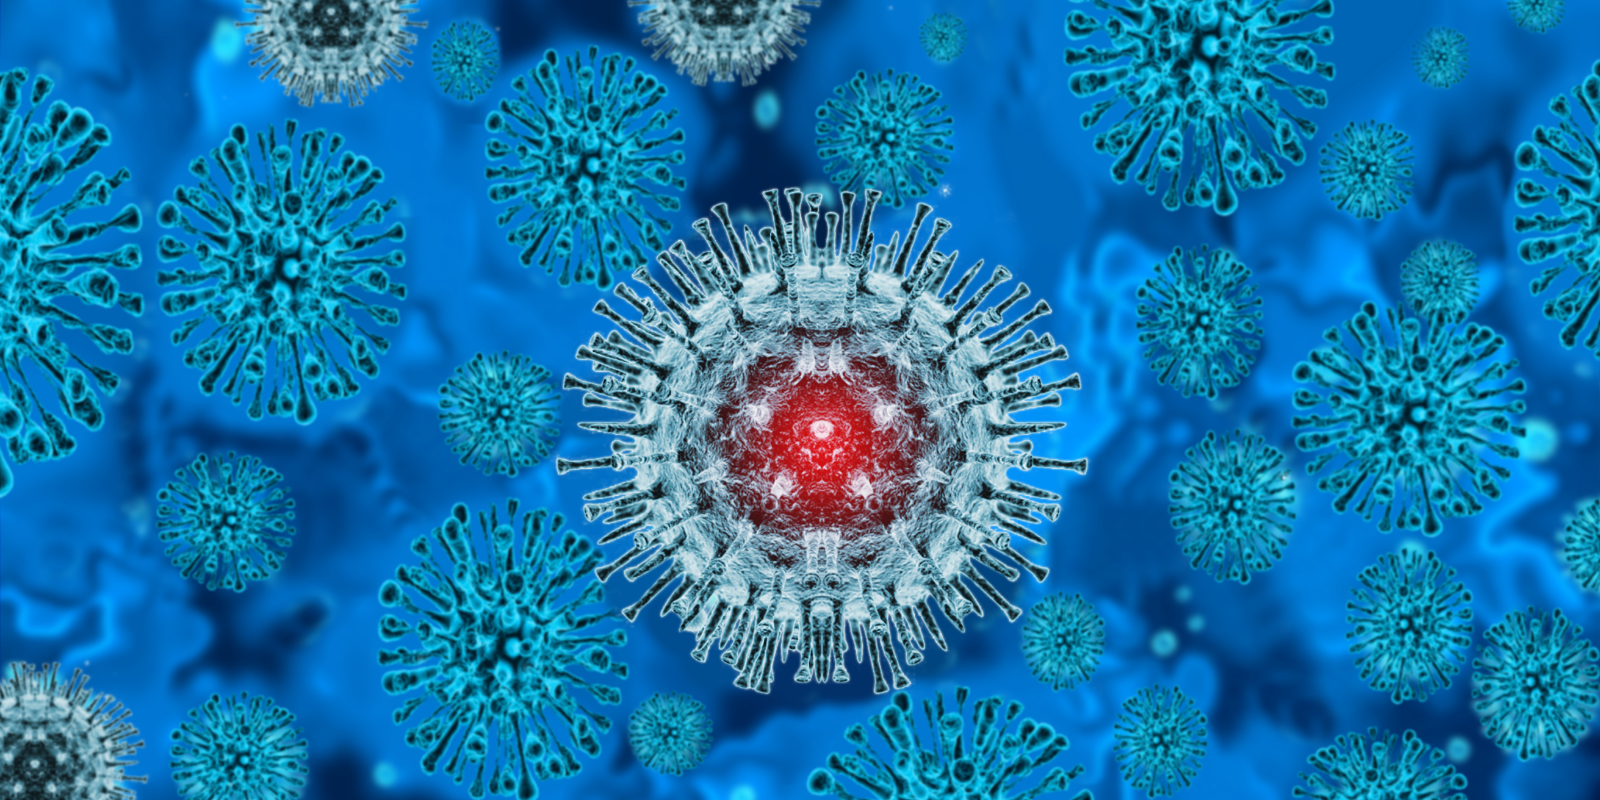 A spiked virus with a red center, representing monkeypox, stands out ominously against a background of blue cells